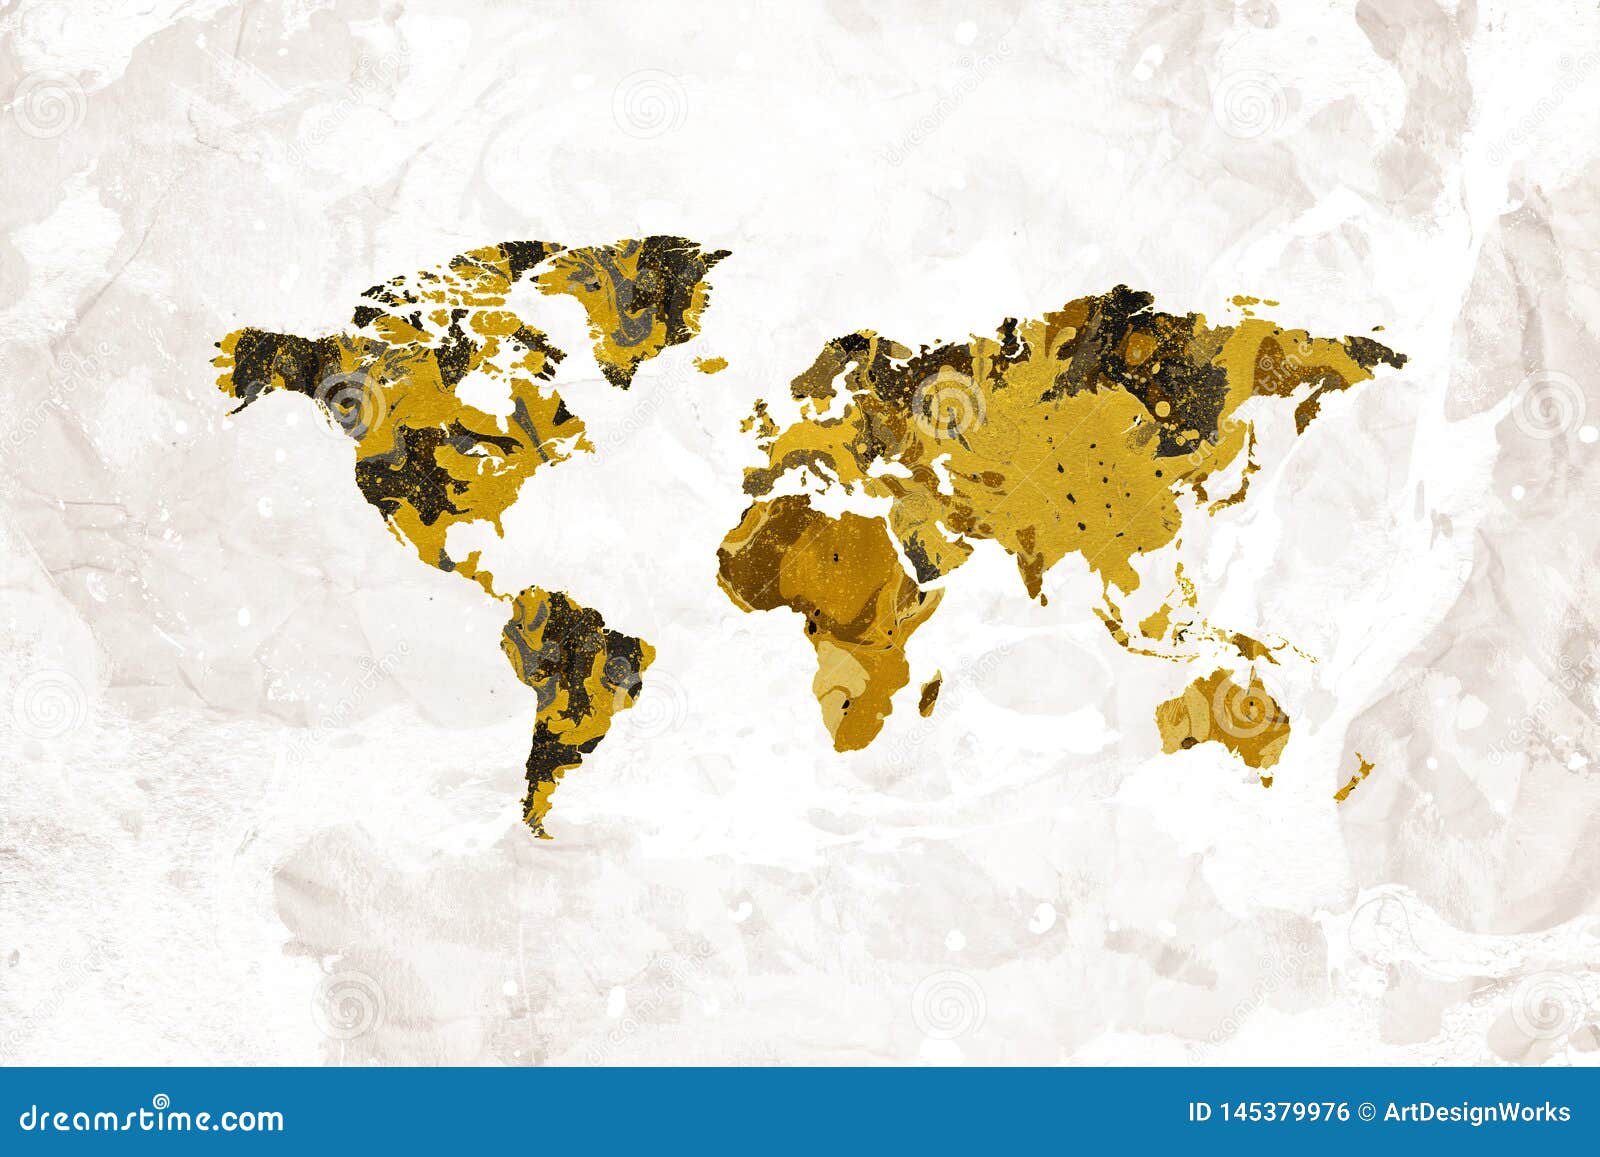 Map of the World Artistic Black Gold Marble Design Stock Photo